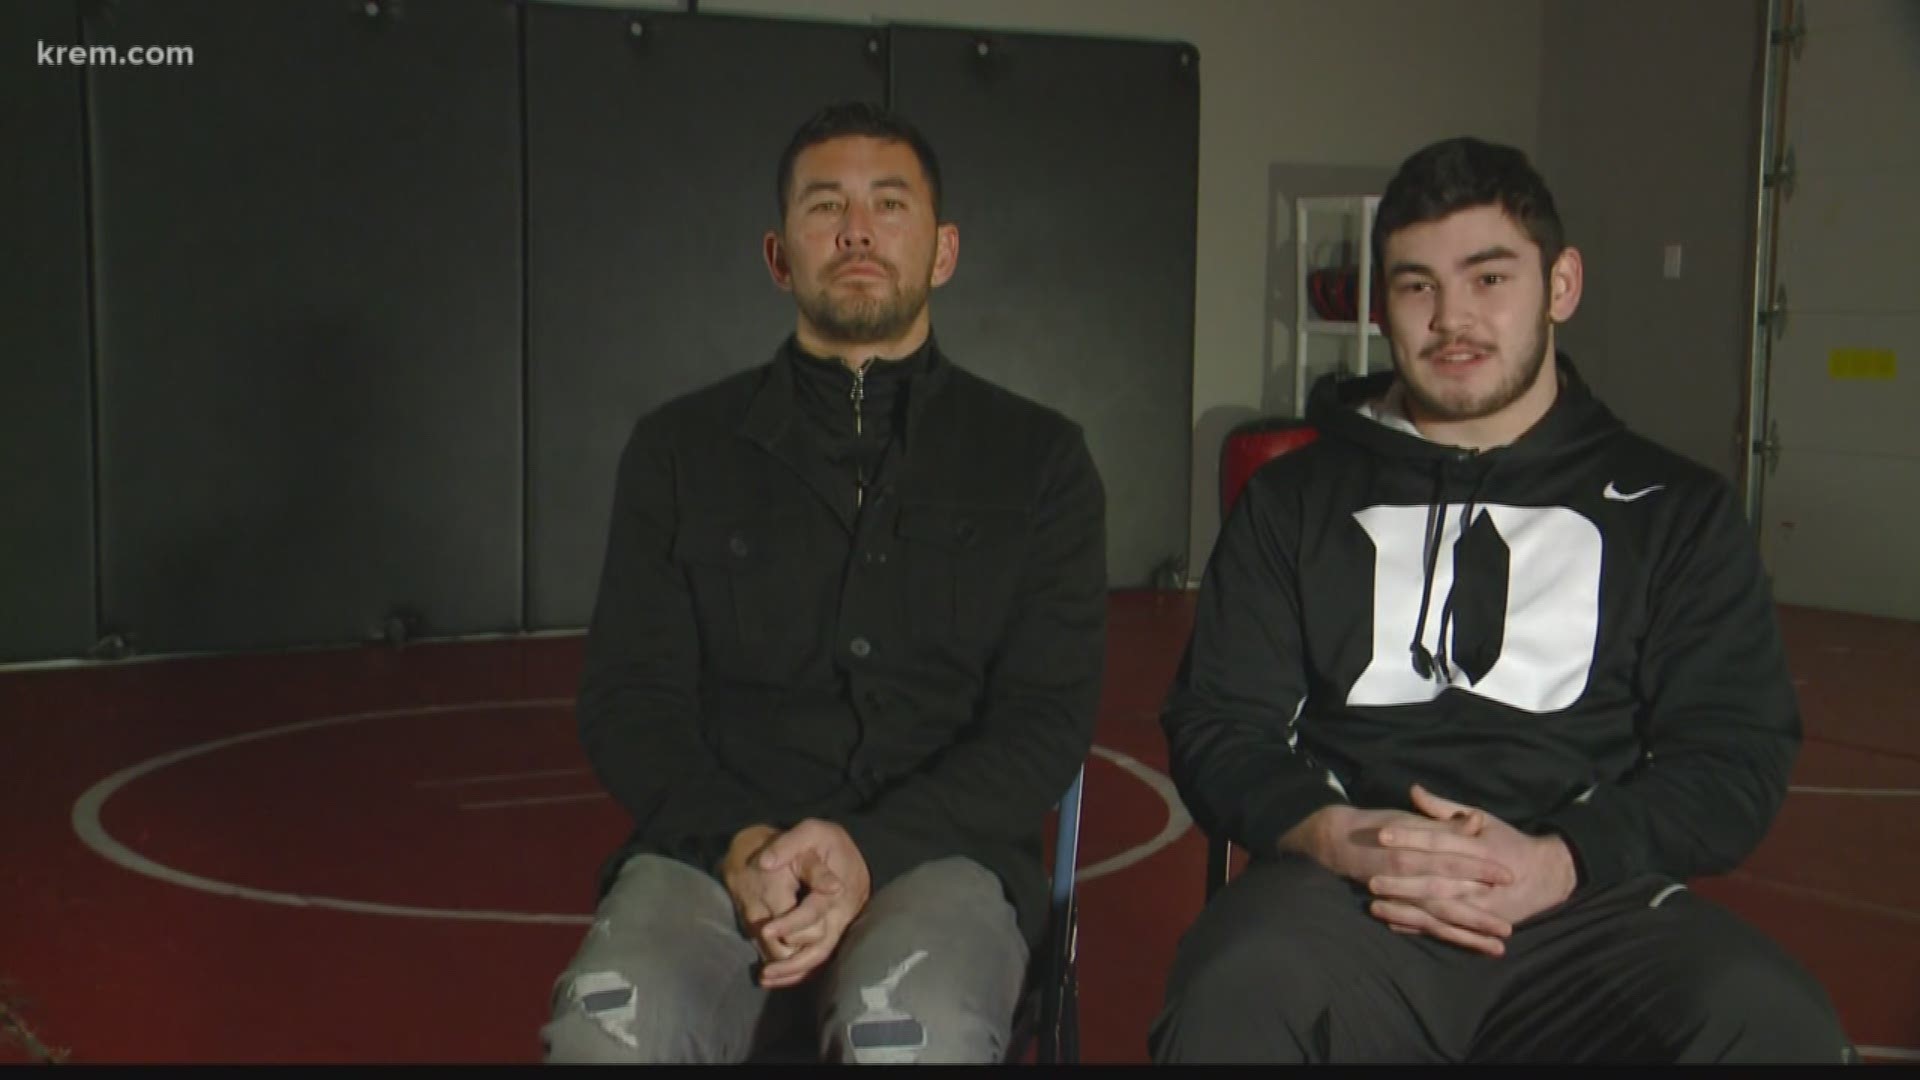 Rick Little, who's gym was the subject of the 2018 KREM documentary 'Fight Town,' has trained professional UFC fighters. Now, he's training his own son.